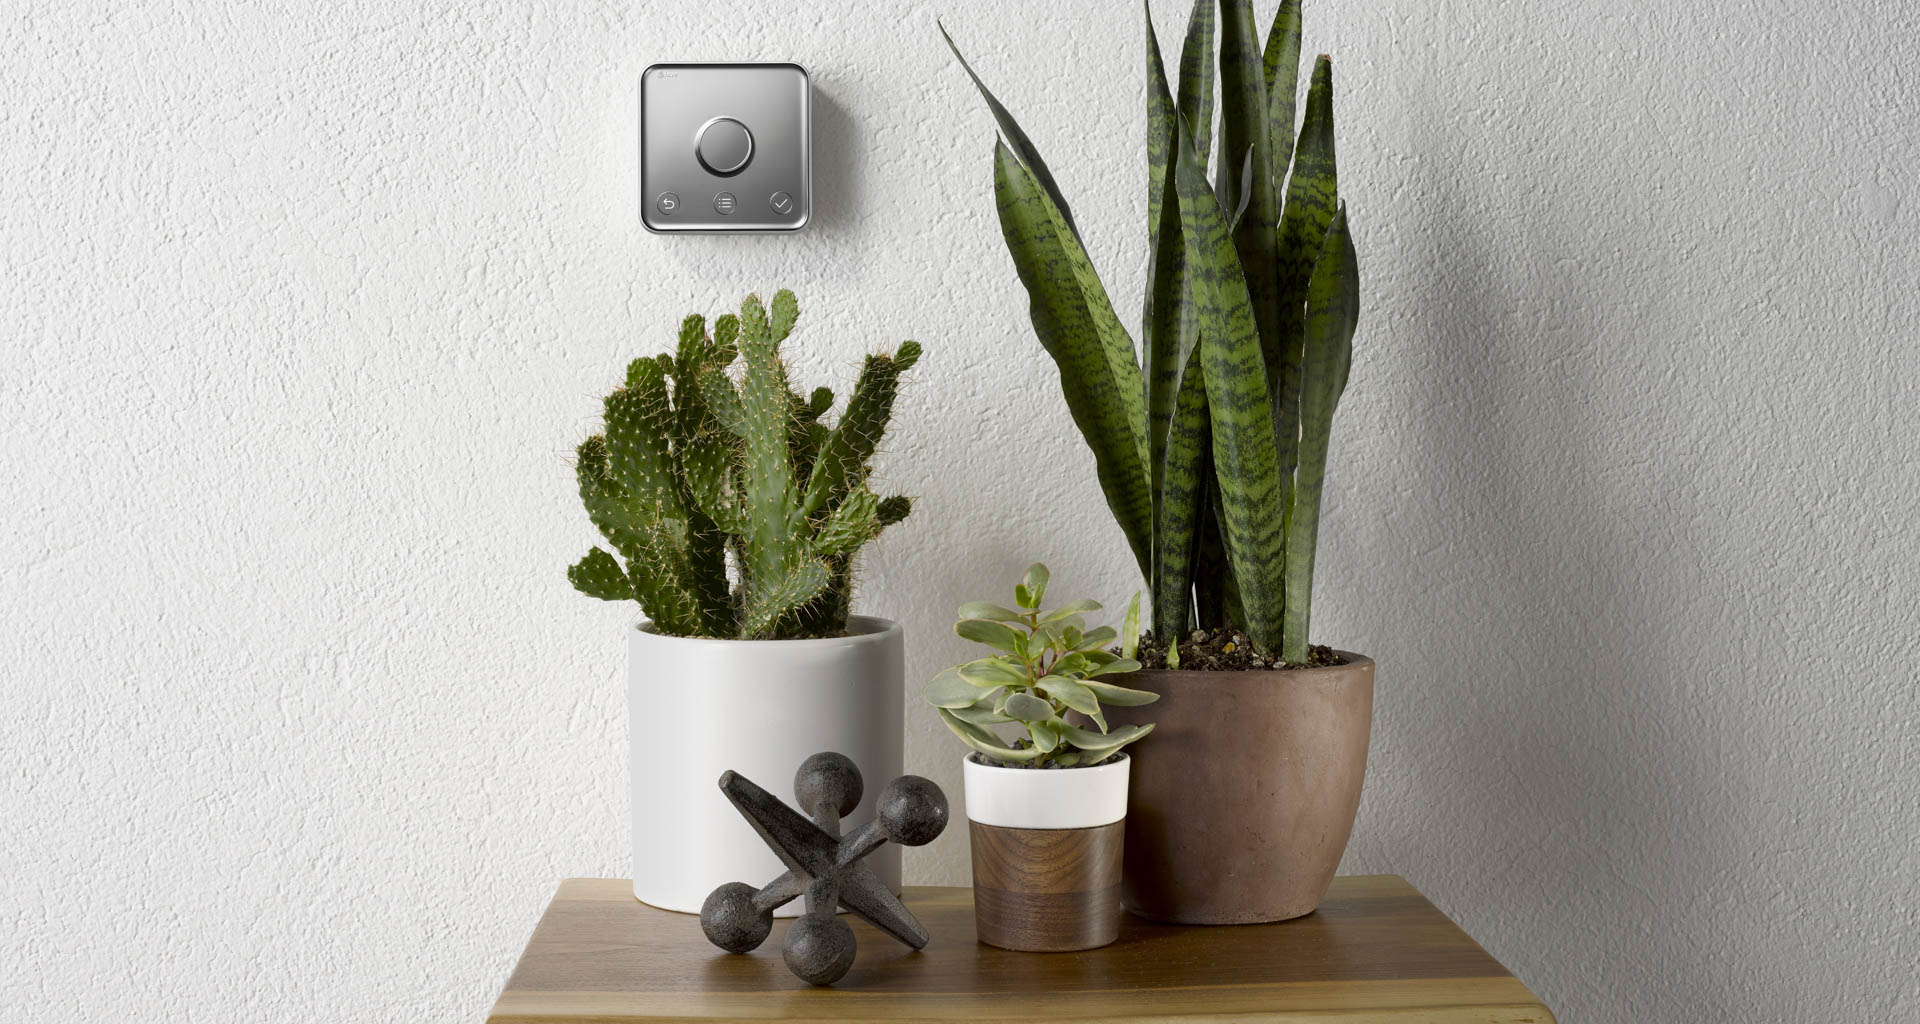 Smart thermostats are sure to add comfort and cost savings to your home, and will be a welcome differentiator to buyers when it goes on the market. Image: Hive.